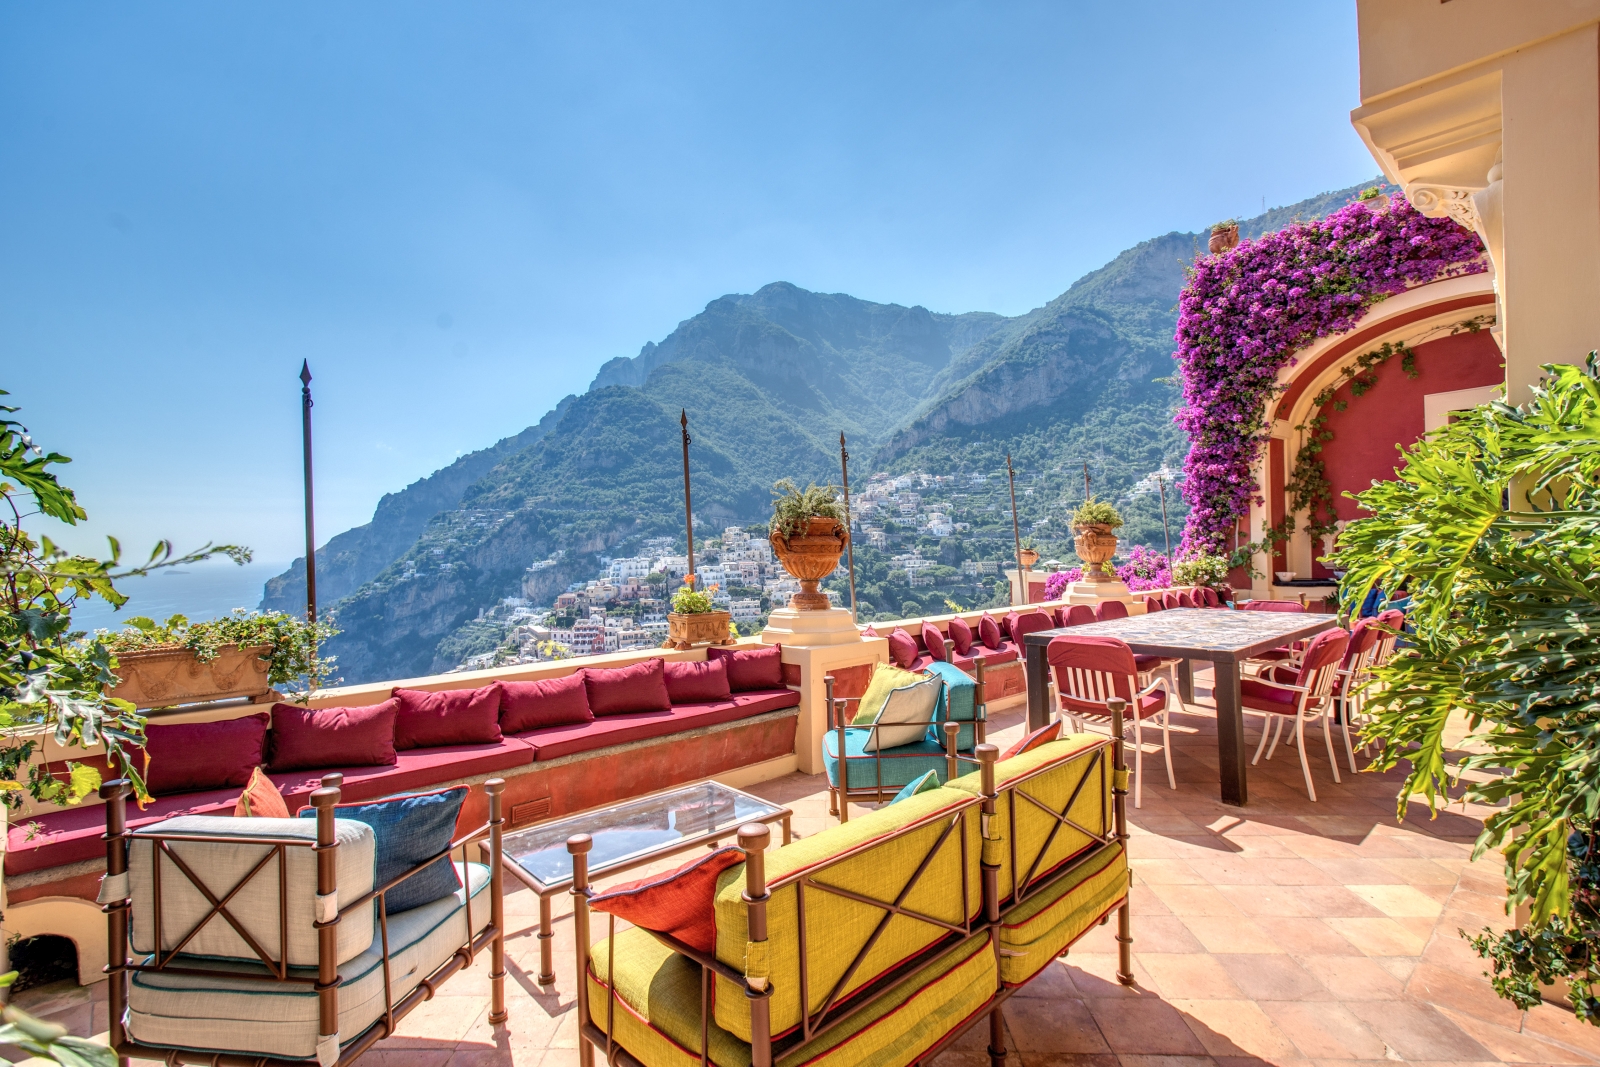 Balcony with outdoor seating and views towards Amalfi